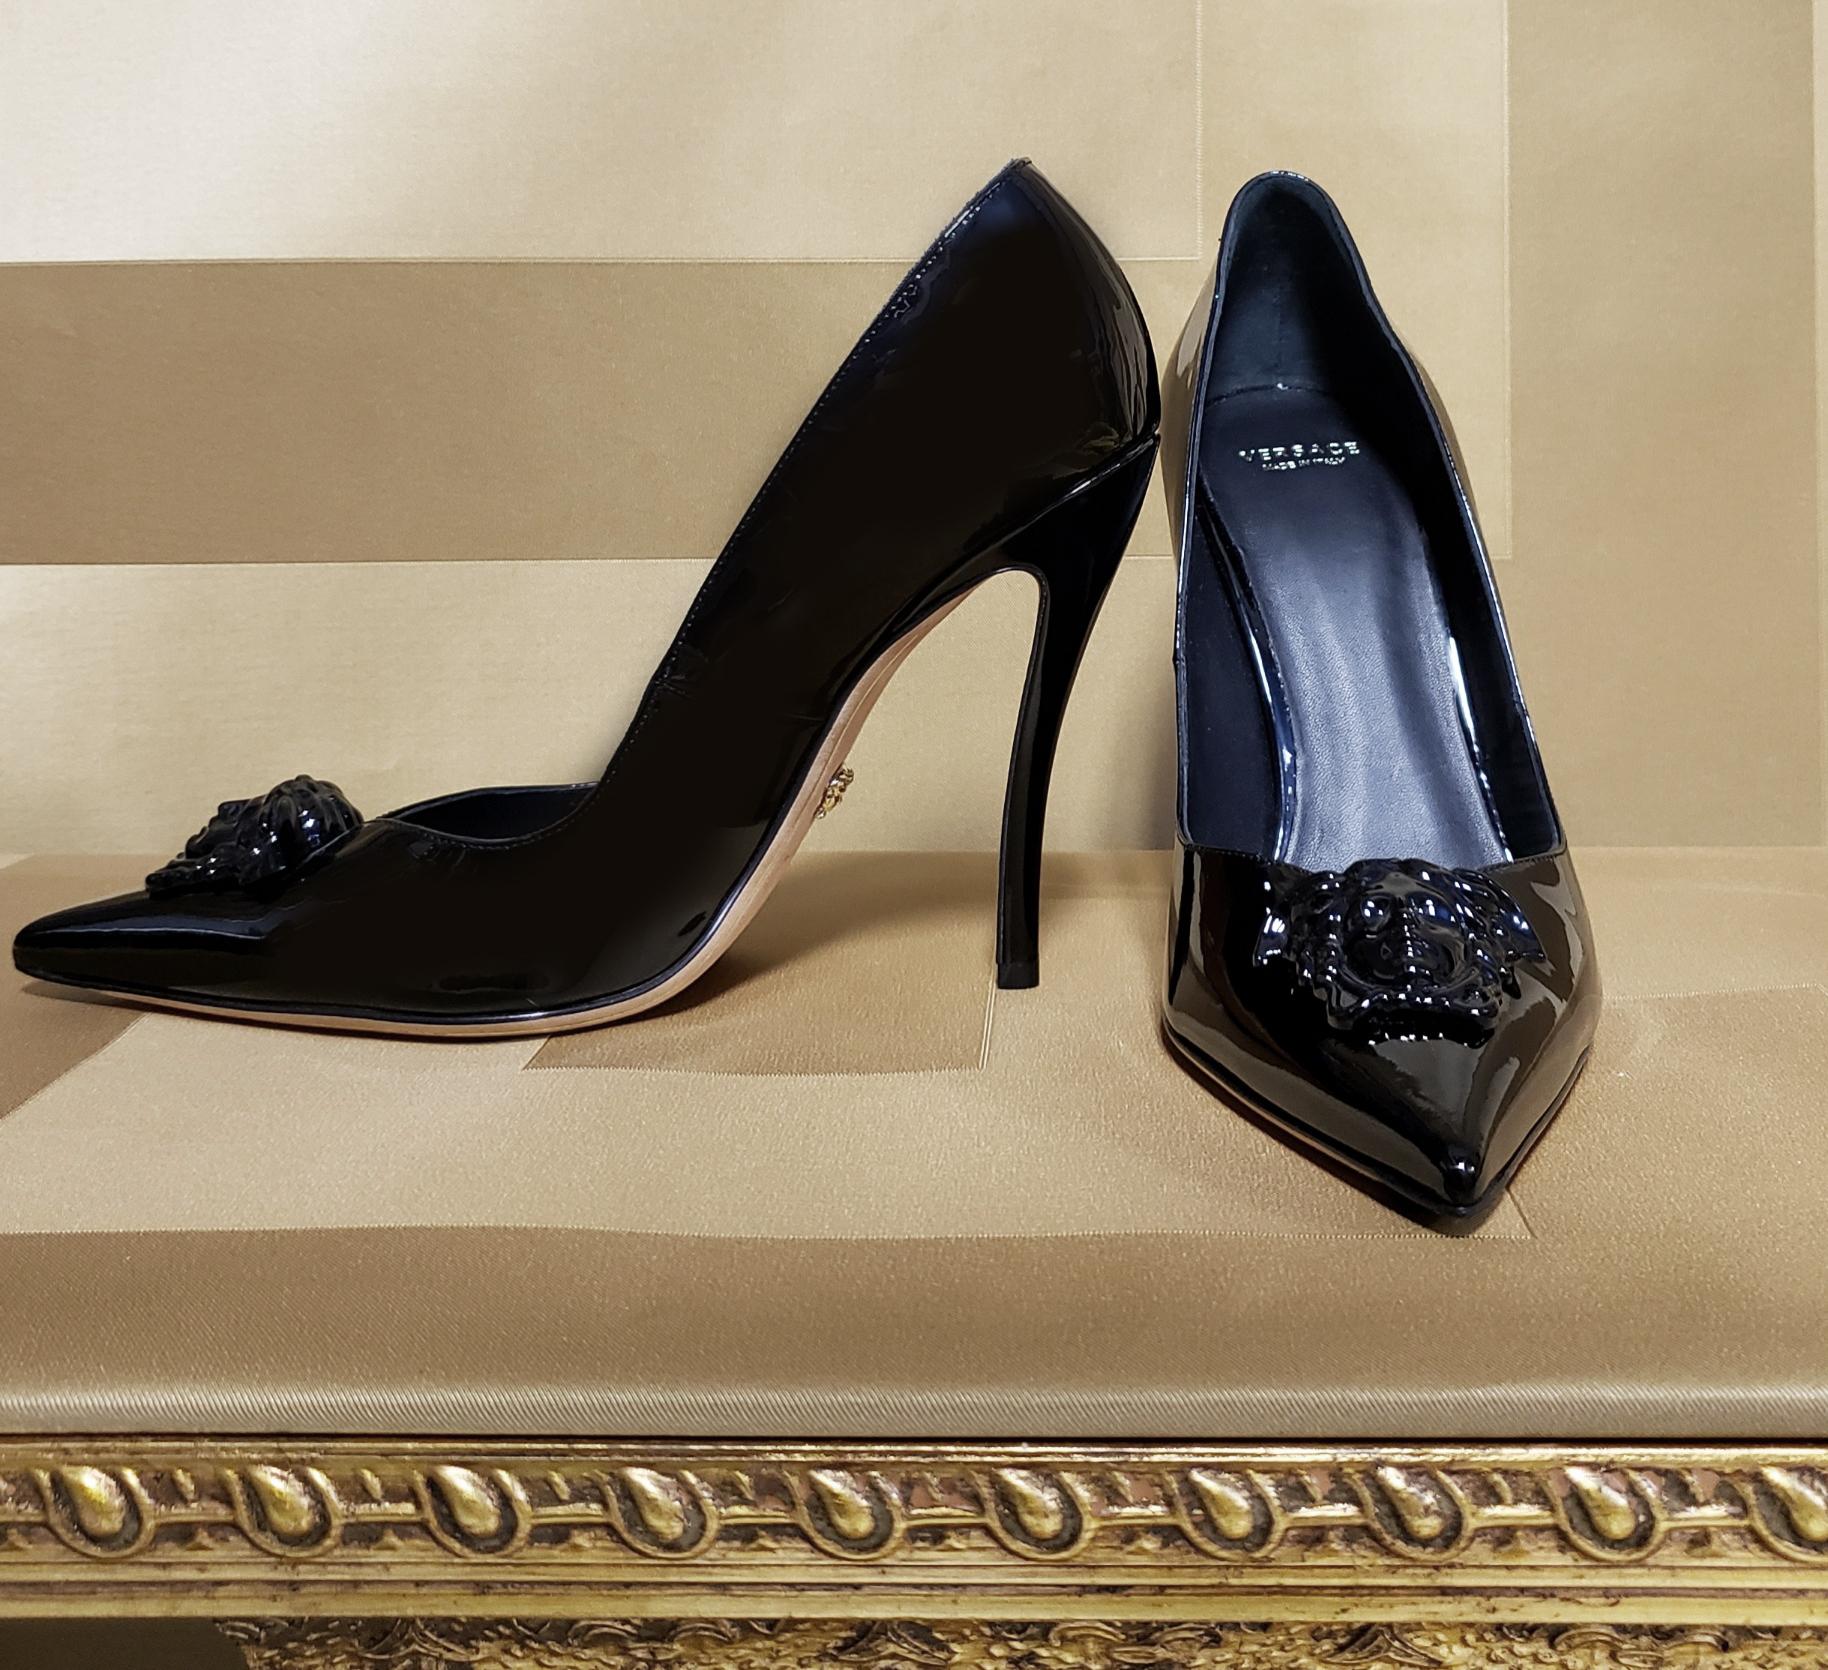 VERSACE

 PALAZZO PUMPS

Black patent leather Versace pumps with a sexy, pointed-toe profile. 

Black Medusa medallion accents the vamp. 


Sleek, sculpted stiletto heel. 

Content: 100% Patent leather

Leather sole.

Measurements:

Heel: 4 1/2